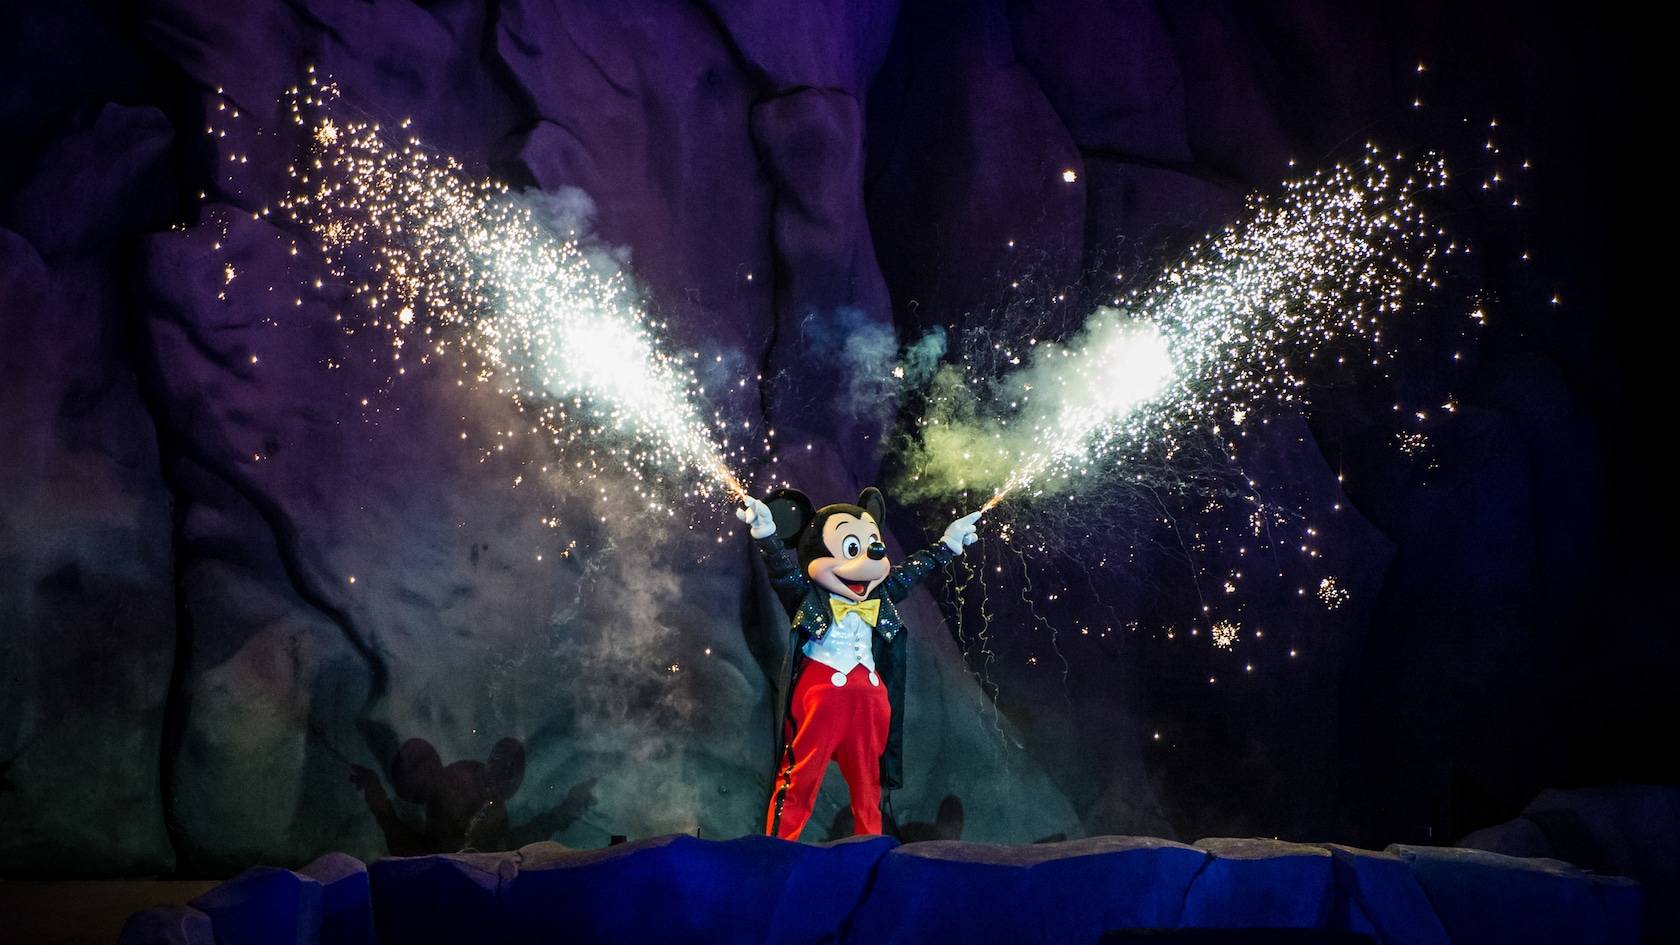 Fantasmic! will be returning in the coming months